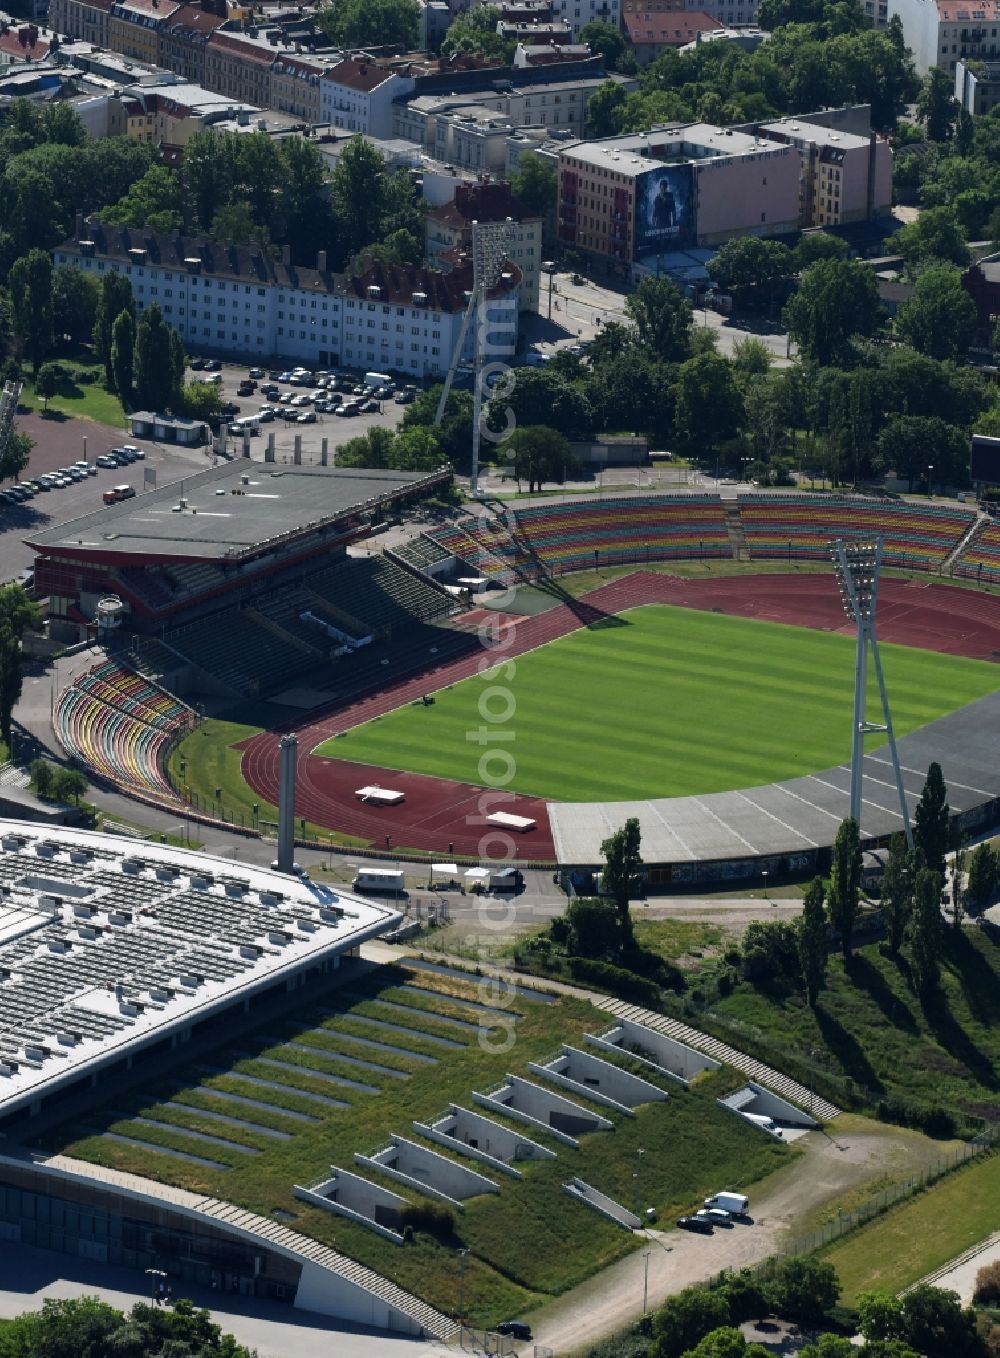 Berlin from above - Stadium at the Friedrich-Ludwig-Jahn-Sportpark with Max-Schmeling-Halle in Berlin Prenzlauer Berg